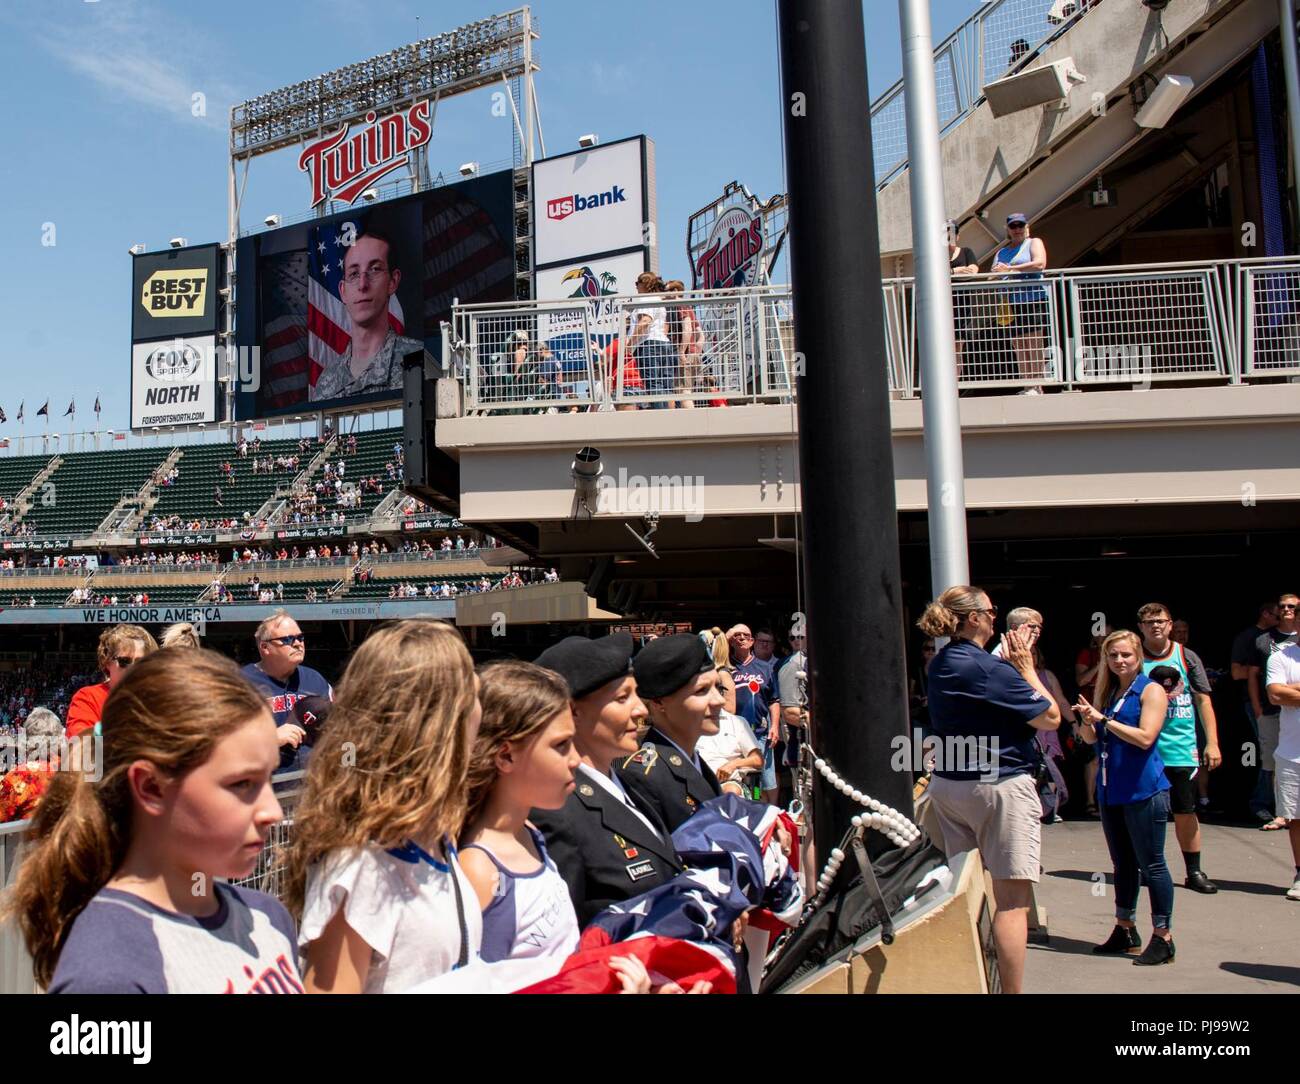 1st Sgt. Katie Blackwell and Staff Sgt. Ashley Meraz prepare to raise the American flag during the 2018 Minnesota Twins Armed Forces Appreciation Day. Blackwell and Meraz are both Purple Heart recipients from the Minnesota Army National Guard. Blackwell received the Purple Heart when she was wounded after her scout vehicle struck an improvised explosive device May 29, 2006, in Baghdad, Iraq. Meraz was wounded after her vehicle drove over a pressure plate improvised explosive device near Forward Operating Base Leatherneck in Afghanistan, October 7, 2009. Her driver, Spc. George Cauley, was kill Stock Photo